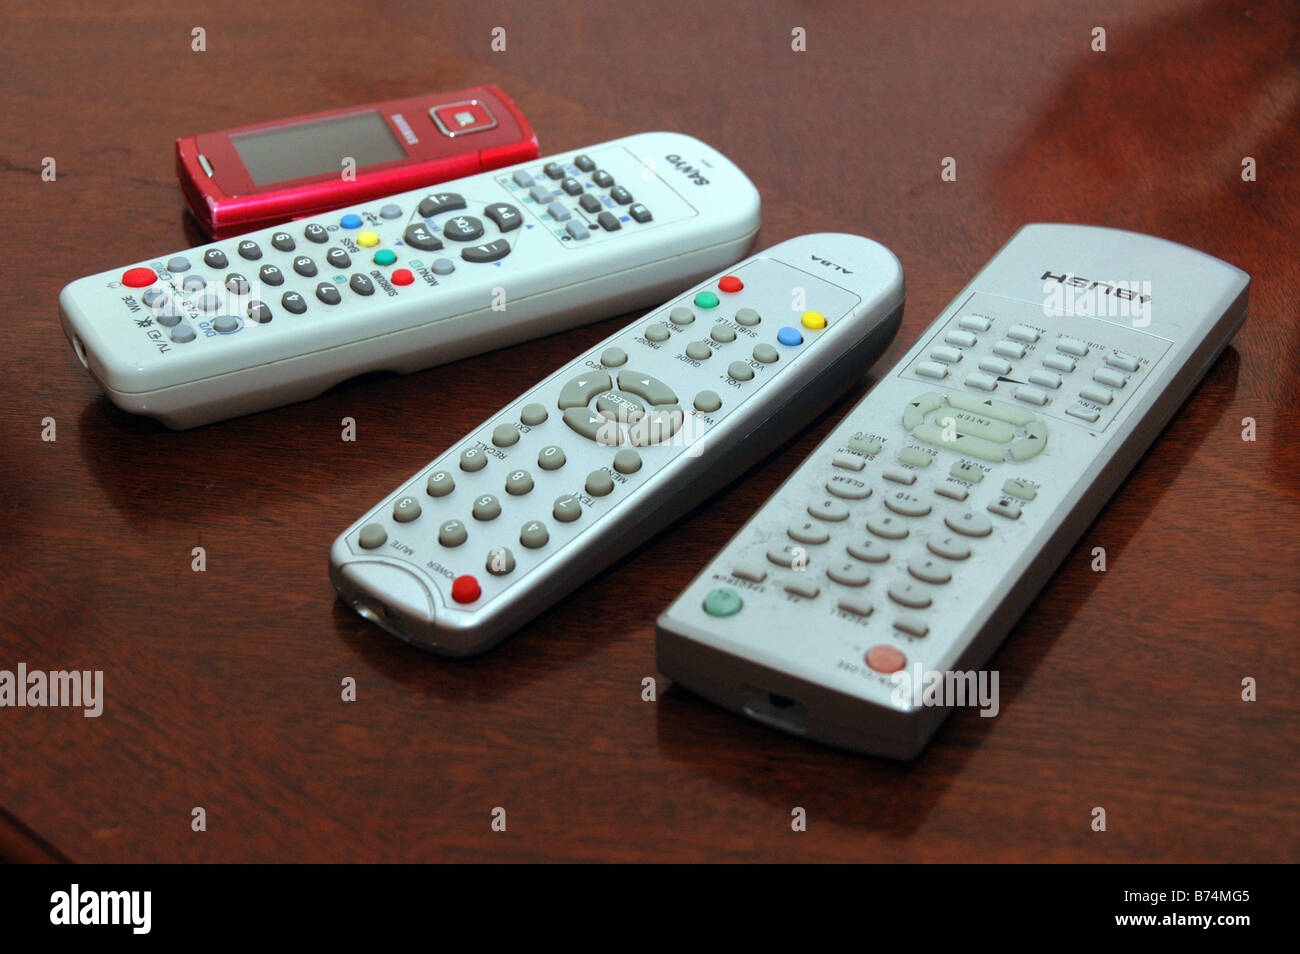 A red mobile phone lies on a table alongside remote controls for digital T.V, DVD. Stock Photo